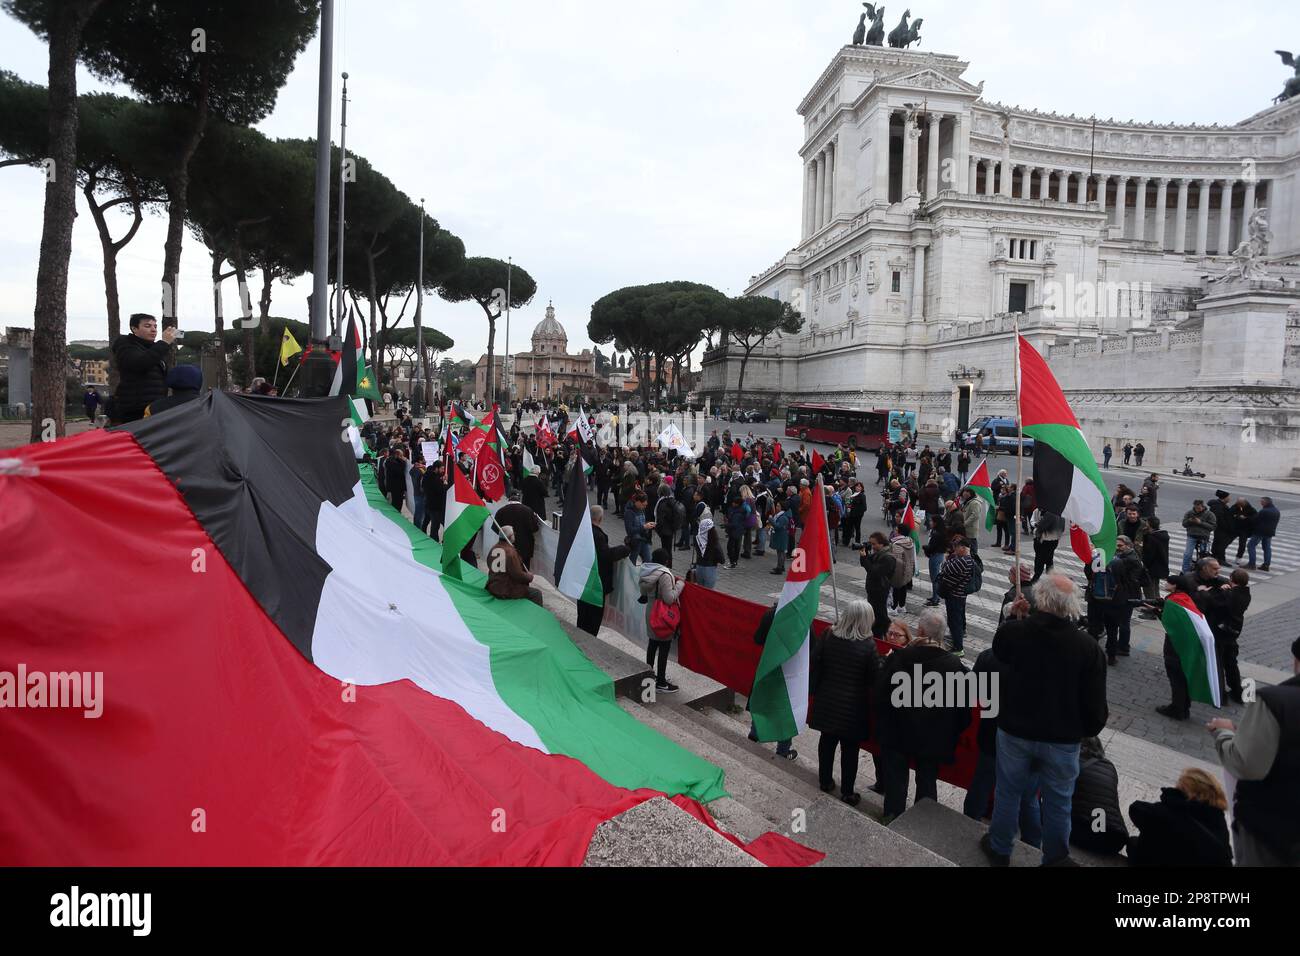 Rome, Italy, March 9, 2023. The protest in Rome against the visit of Israeli Prime Minister Benjamin Netanyahu. Rome, Italy, March 9, 2023. Credit: Antonio Nardelli / Alamy Live News Stock Photo